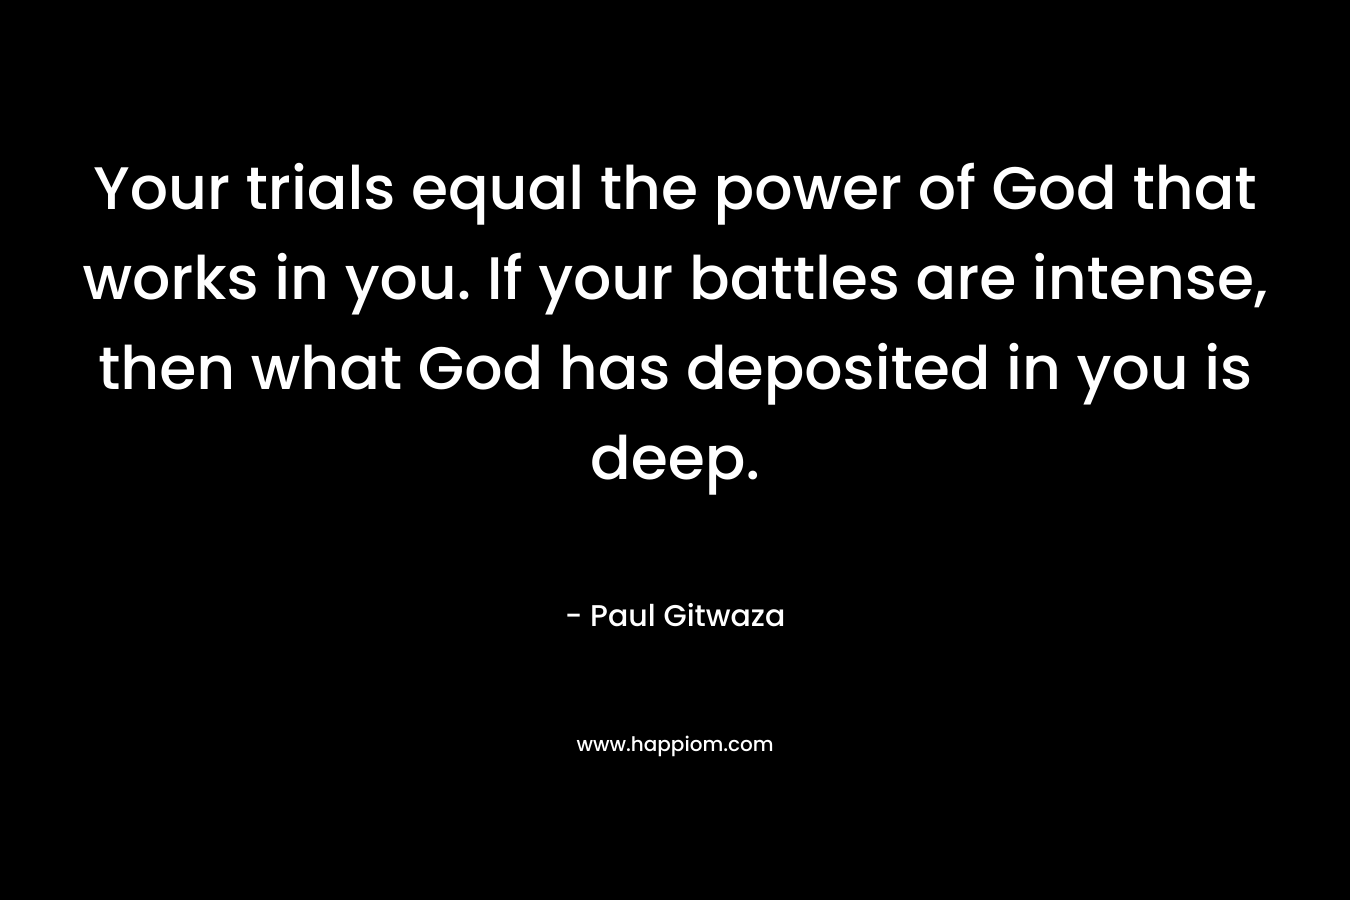 Your trials equal the power of God that works in you. If your battles are intense, then what God has deposited in you is deep. – Paul Gitwaza